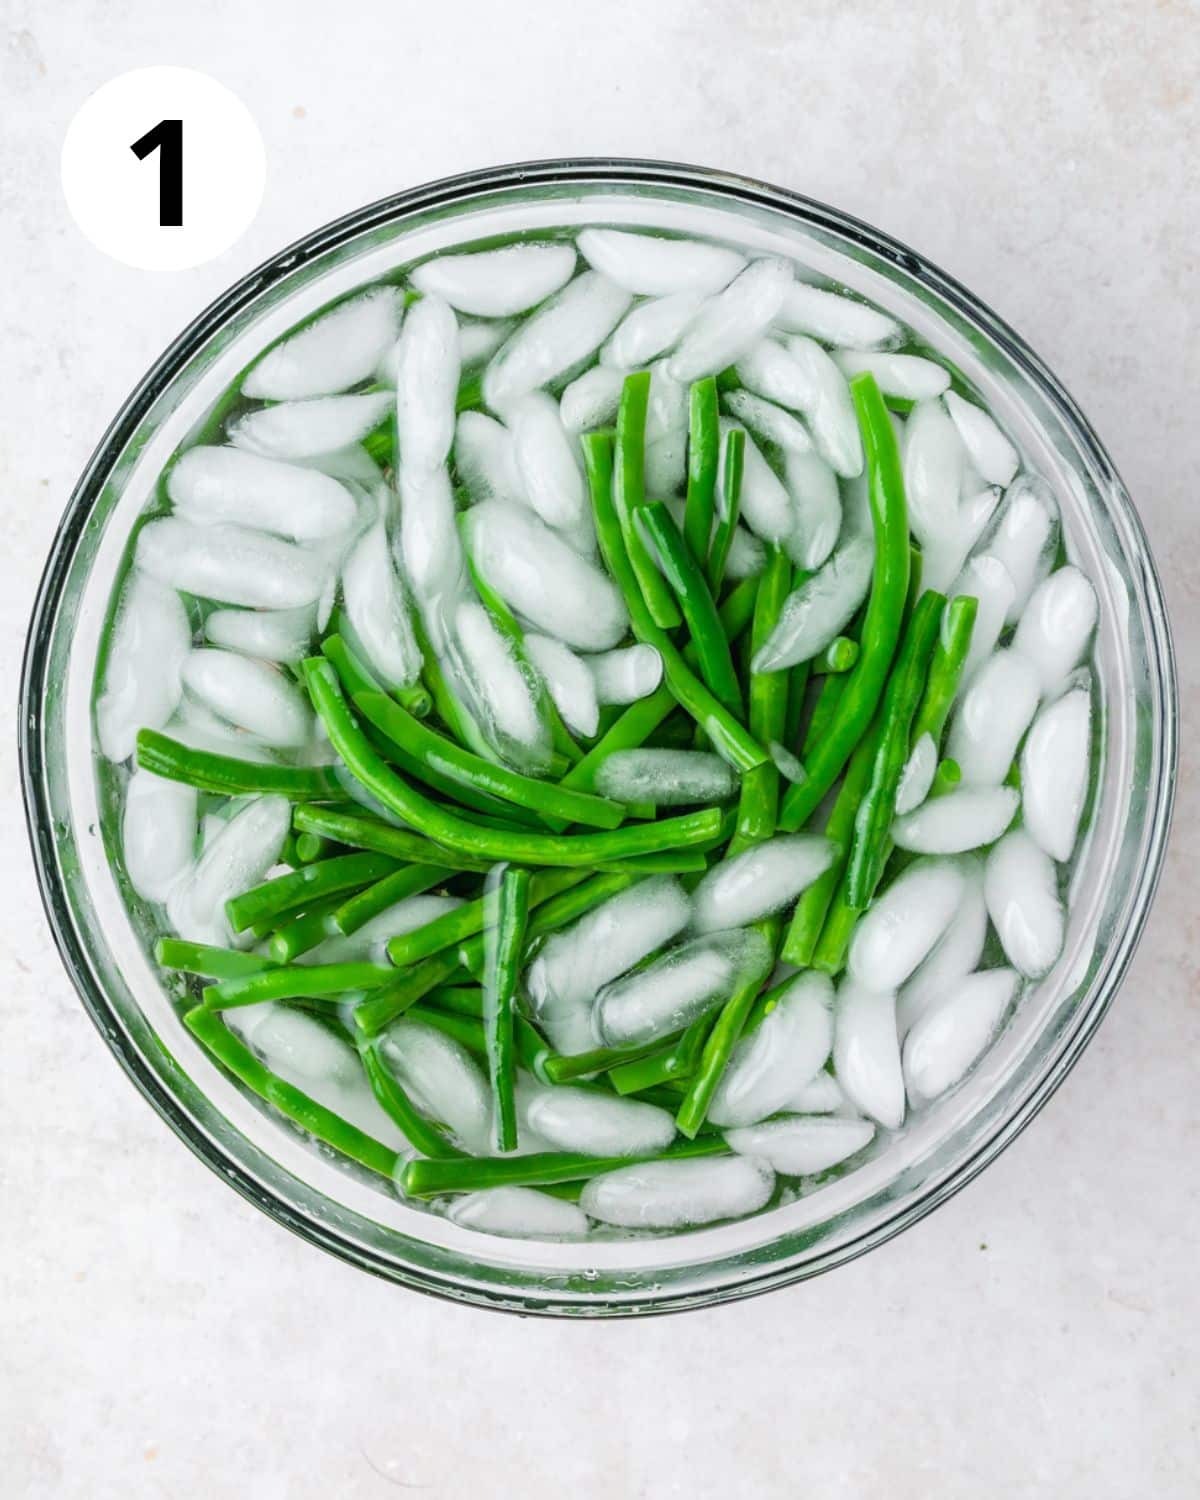 blanched green beans in ice water.